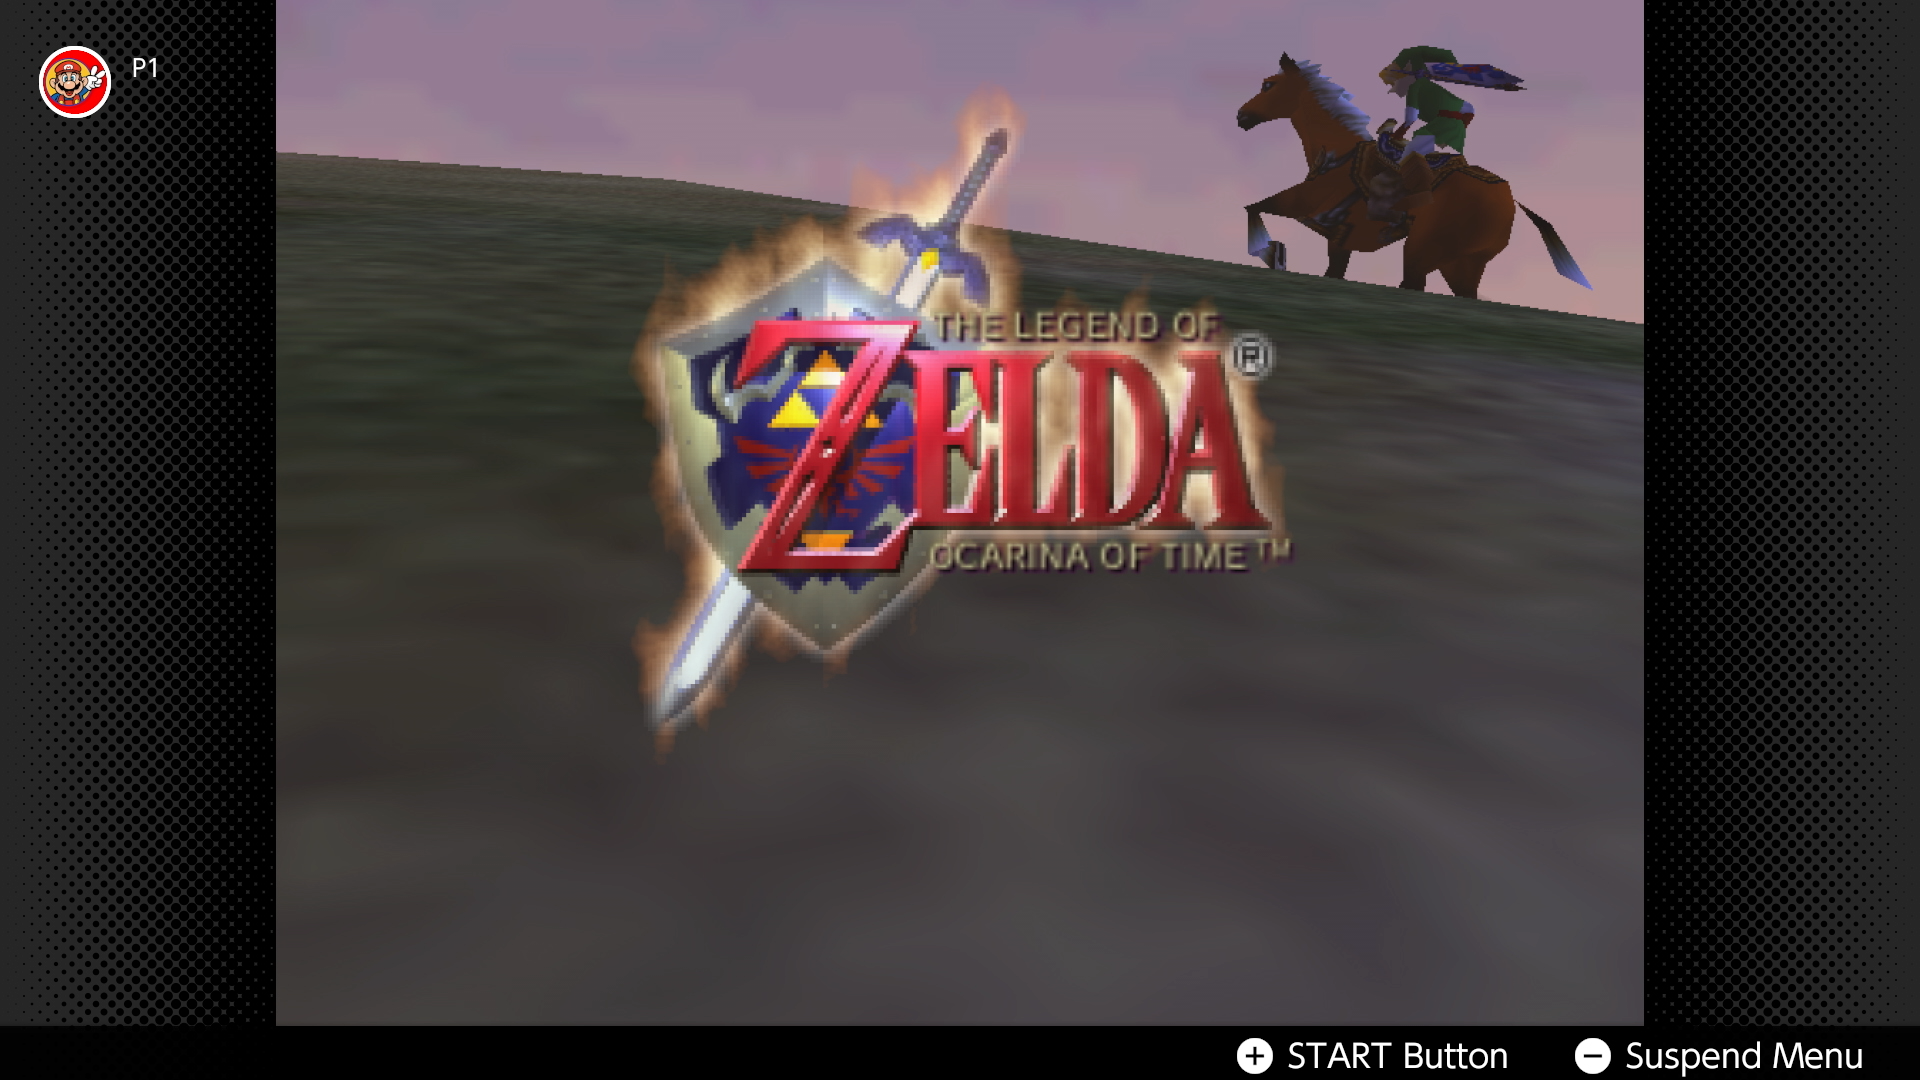 Switch Vs Wii U Emulation  Ocarina of Time Which is BETTER? 